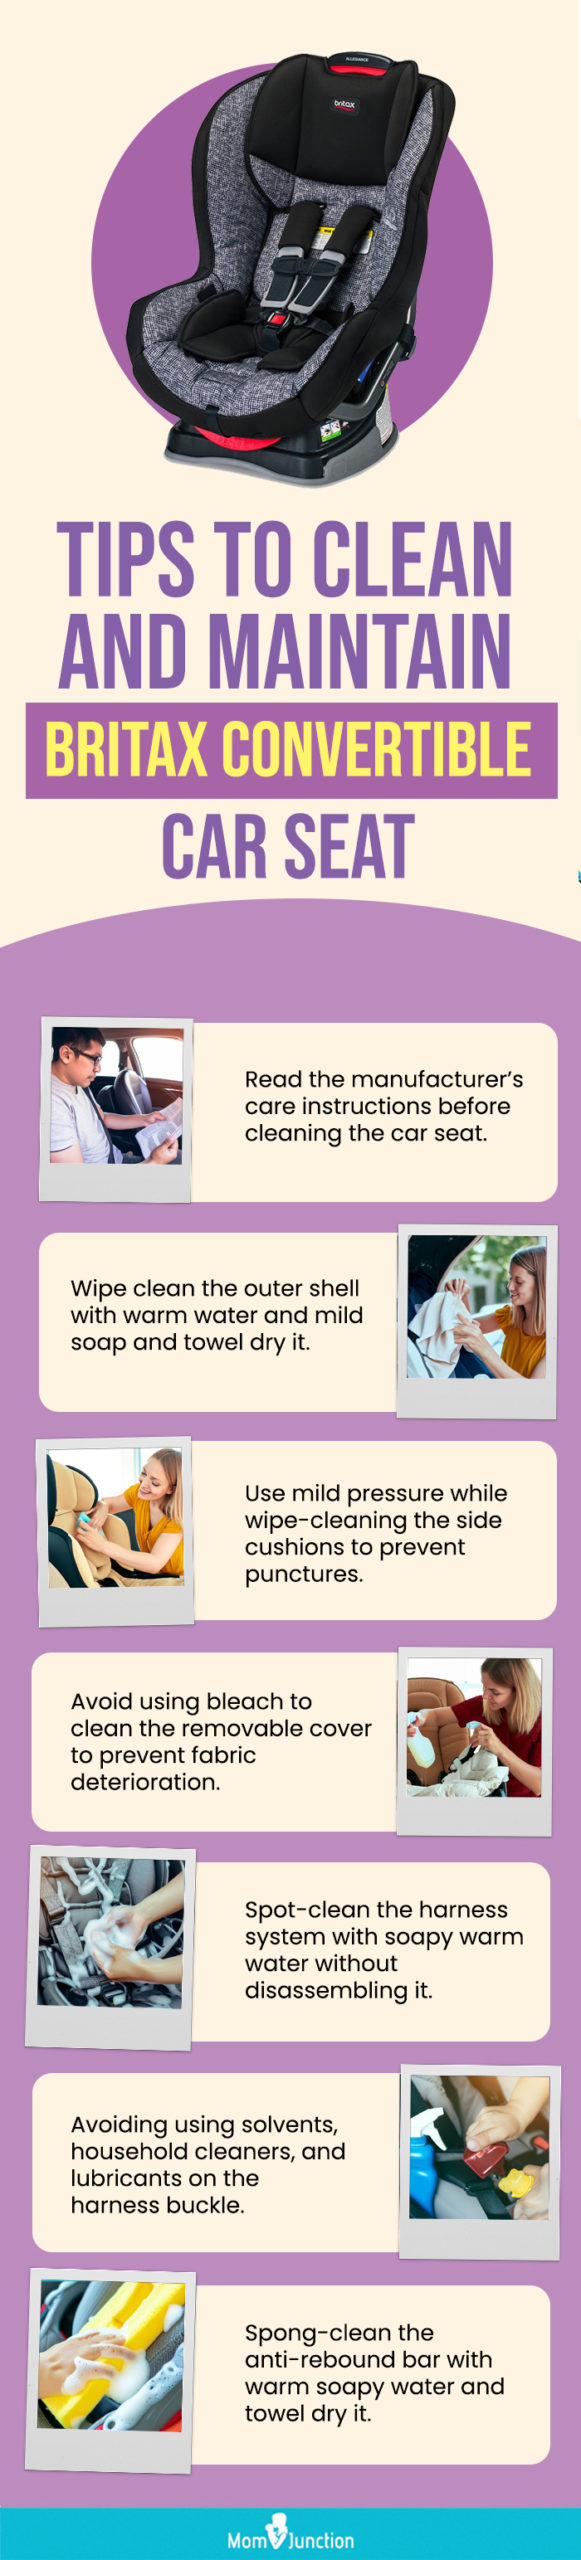 Tips To Clean And Maintain Britax Convertible Car Seat (infographic)